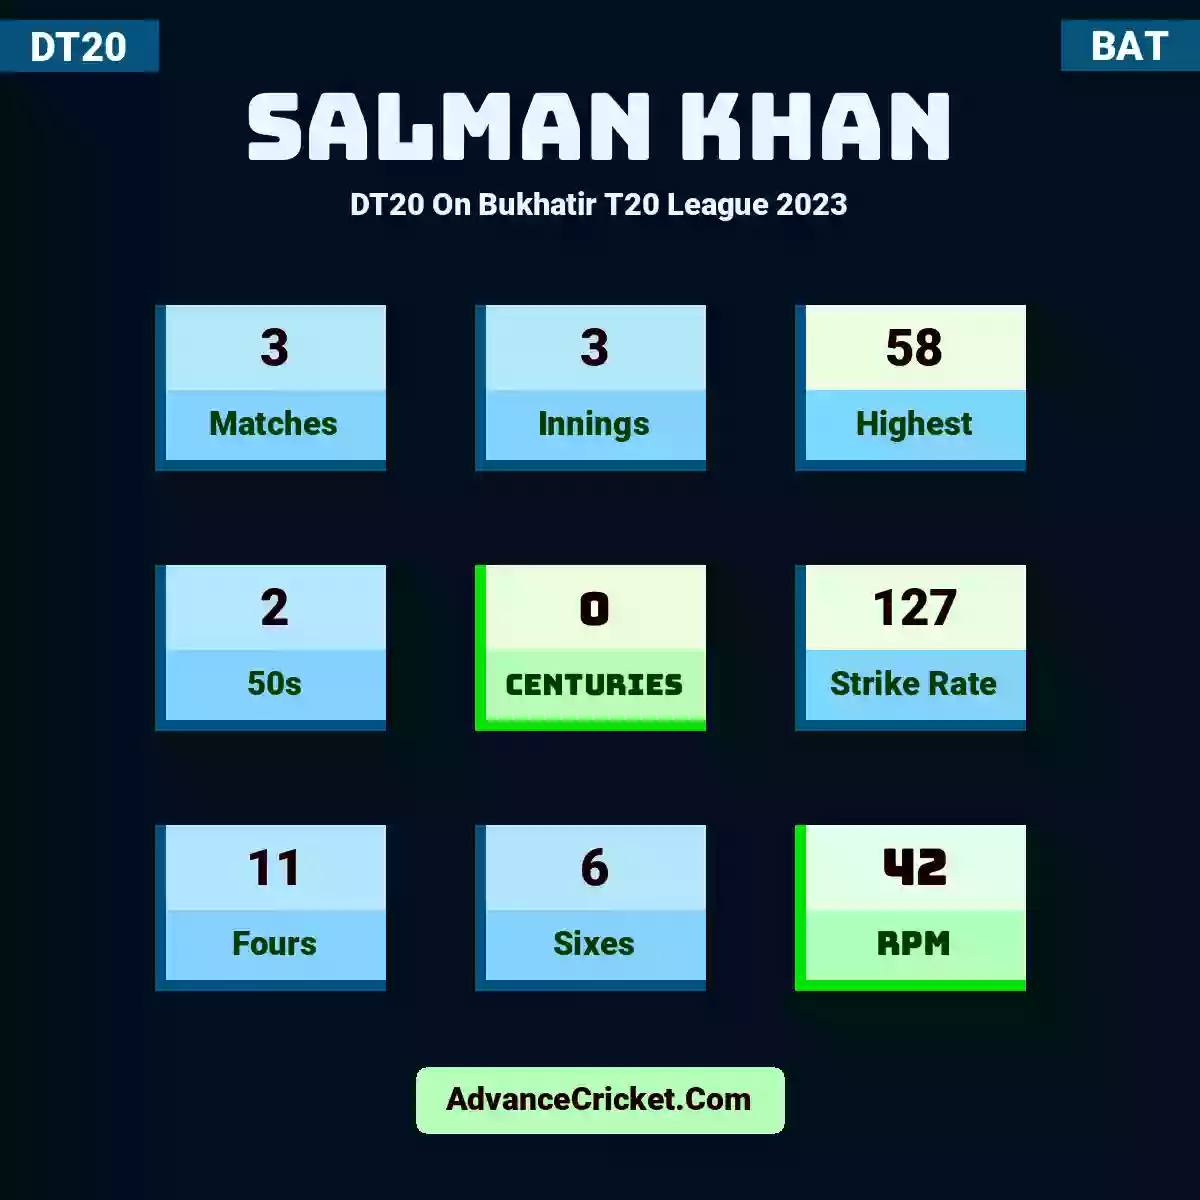 Salman Khan DT20  On Bukhatir T20 League 2023, Salman Khan played 3 matches, scored 58 runs as highest, 2 half-centuries, and 0 centuries, with a strike rate of 127. S.Khan hit 11 fours and 6 sixes, with an RPM of 42.